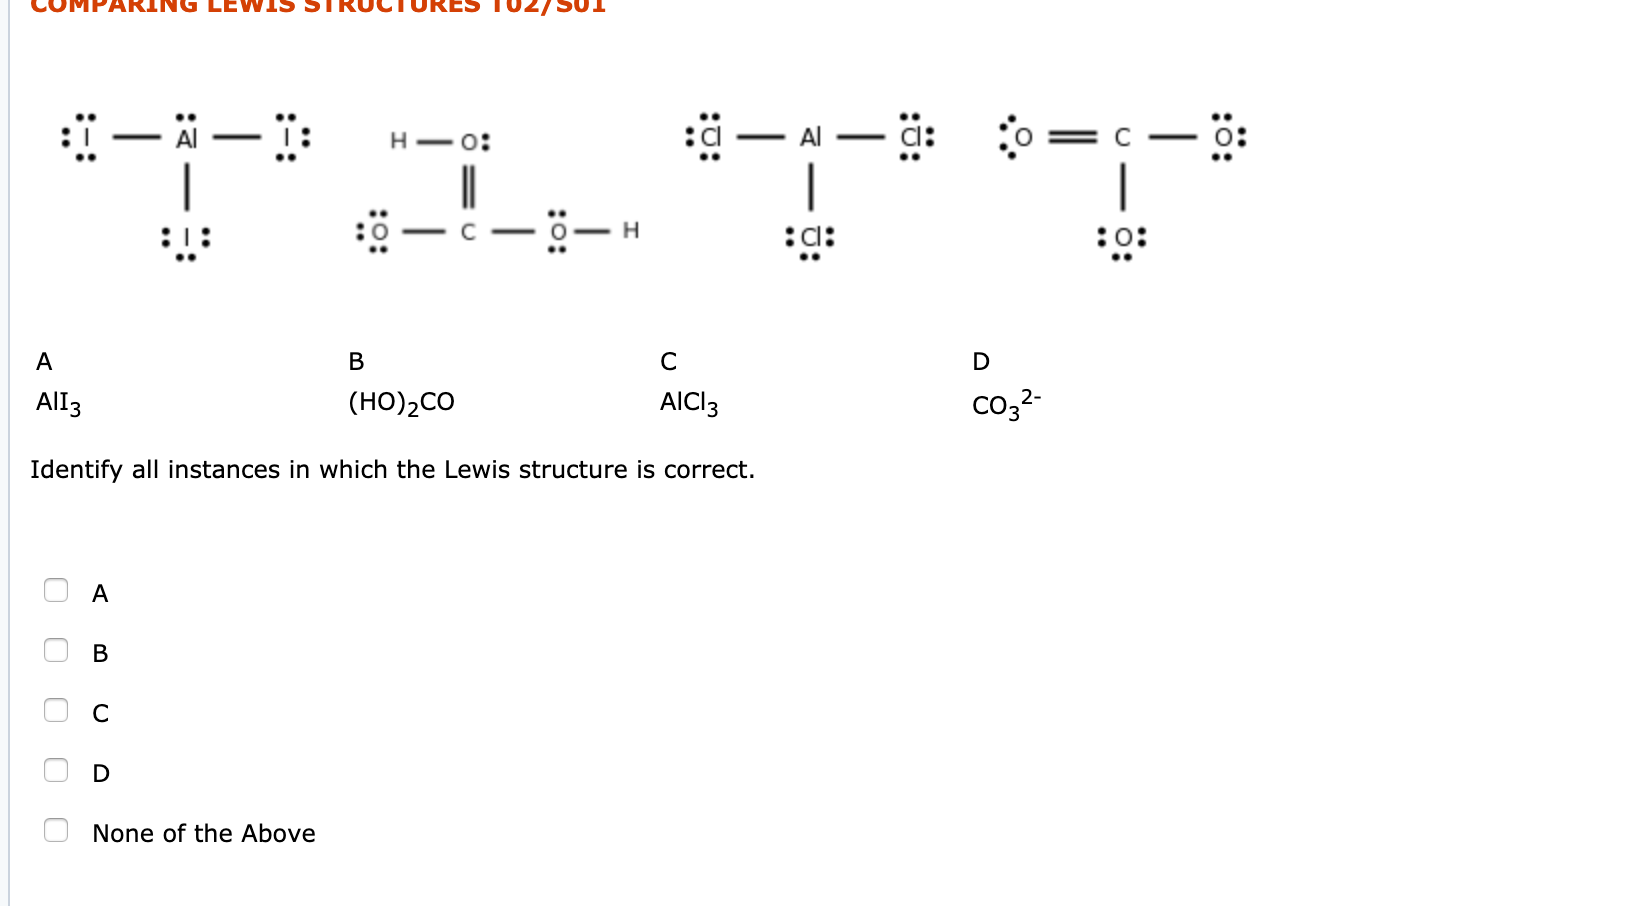 Solved CUMPARING LEWIS STRUCTURES 102/ SUI :: - Ä – : H–O: — | Chegg.com